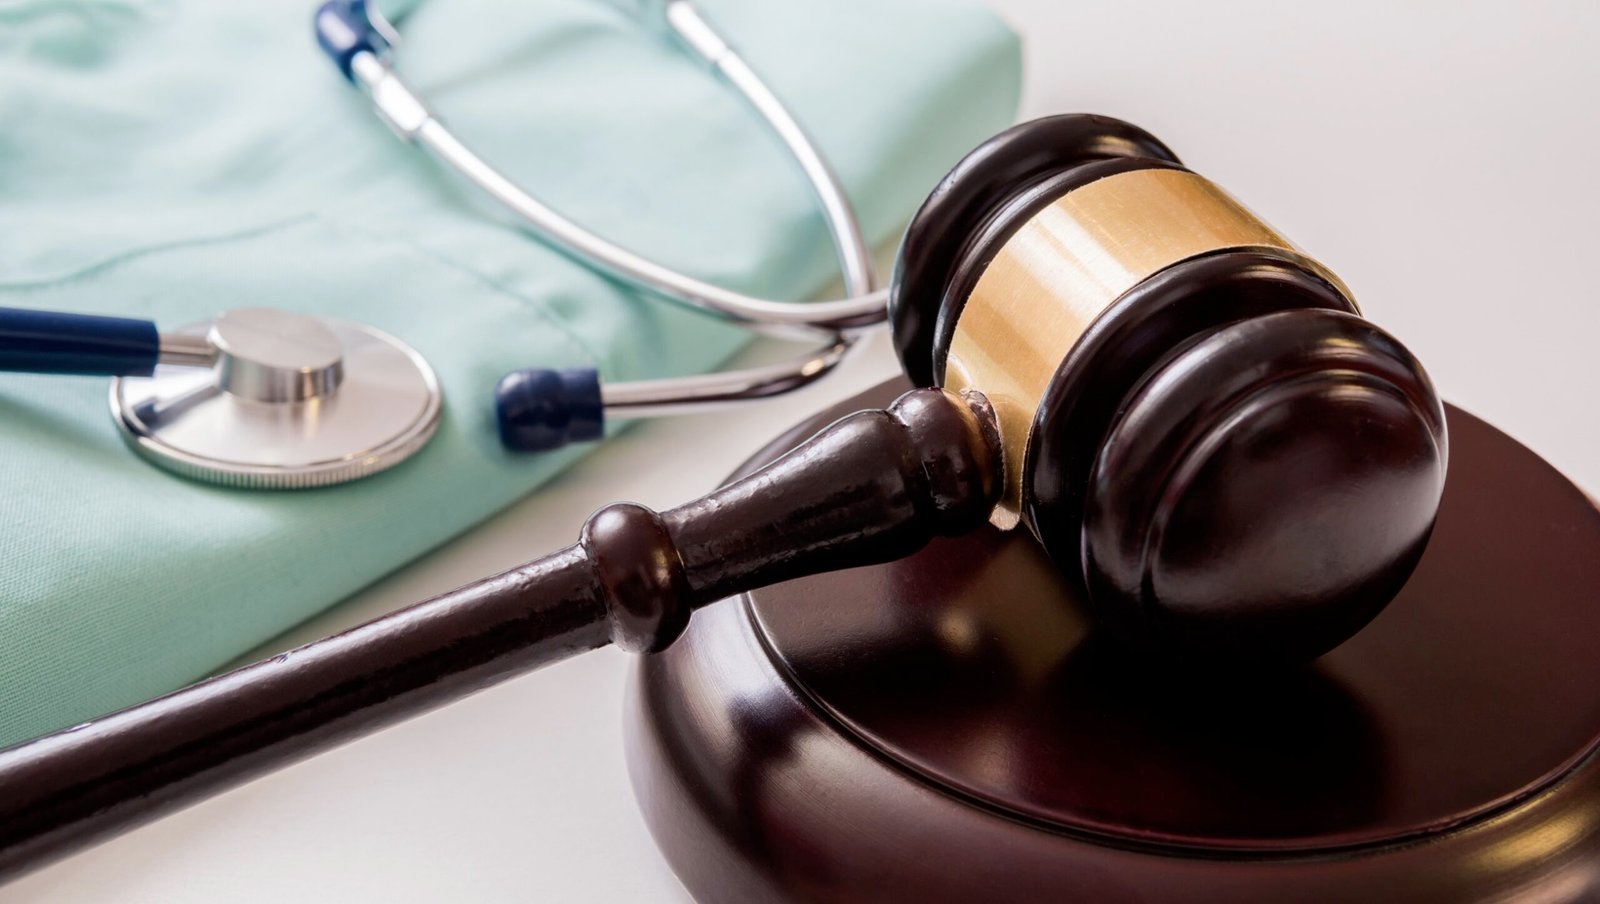 Medical Malpractice Lawyer in the US